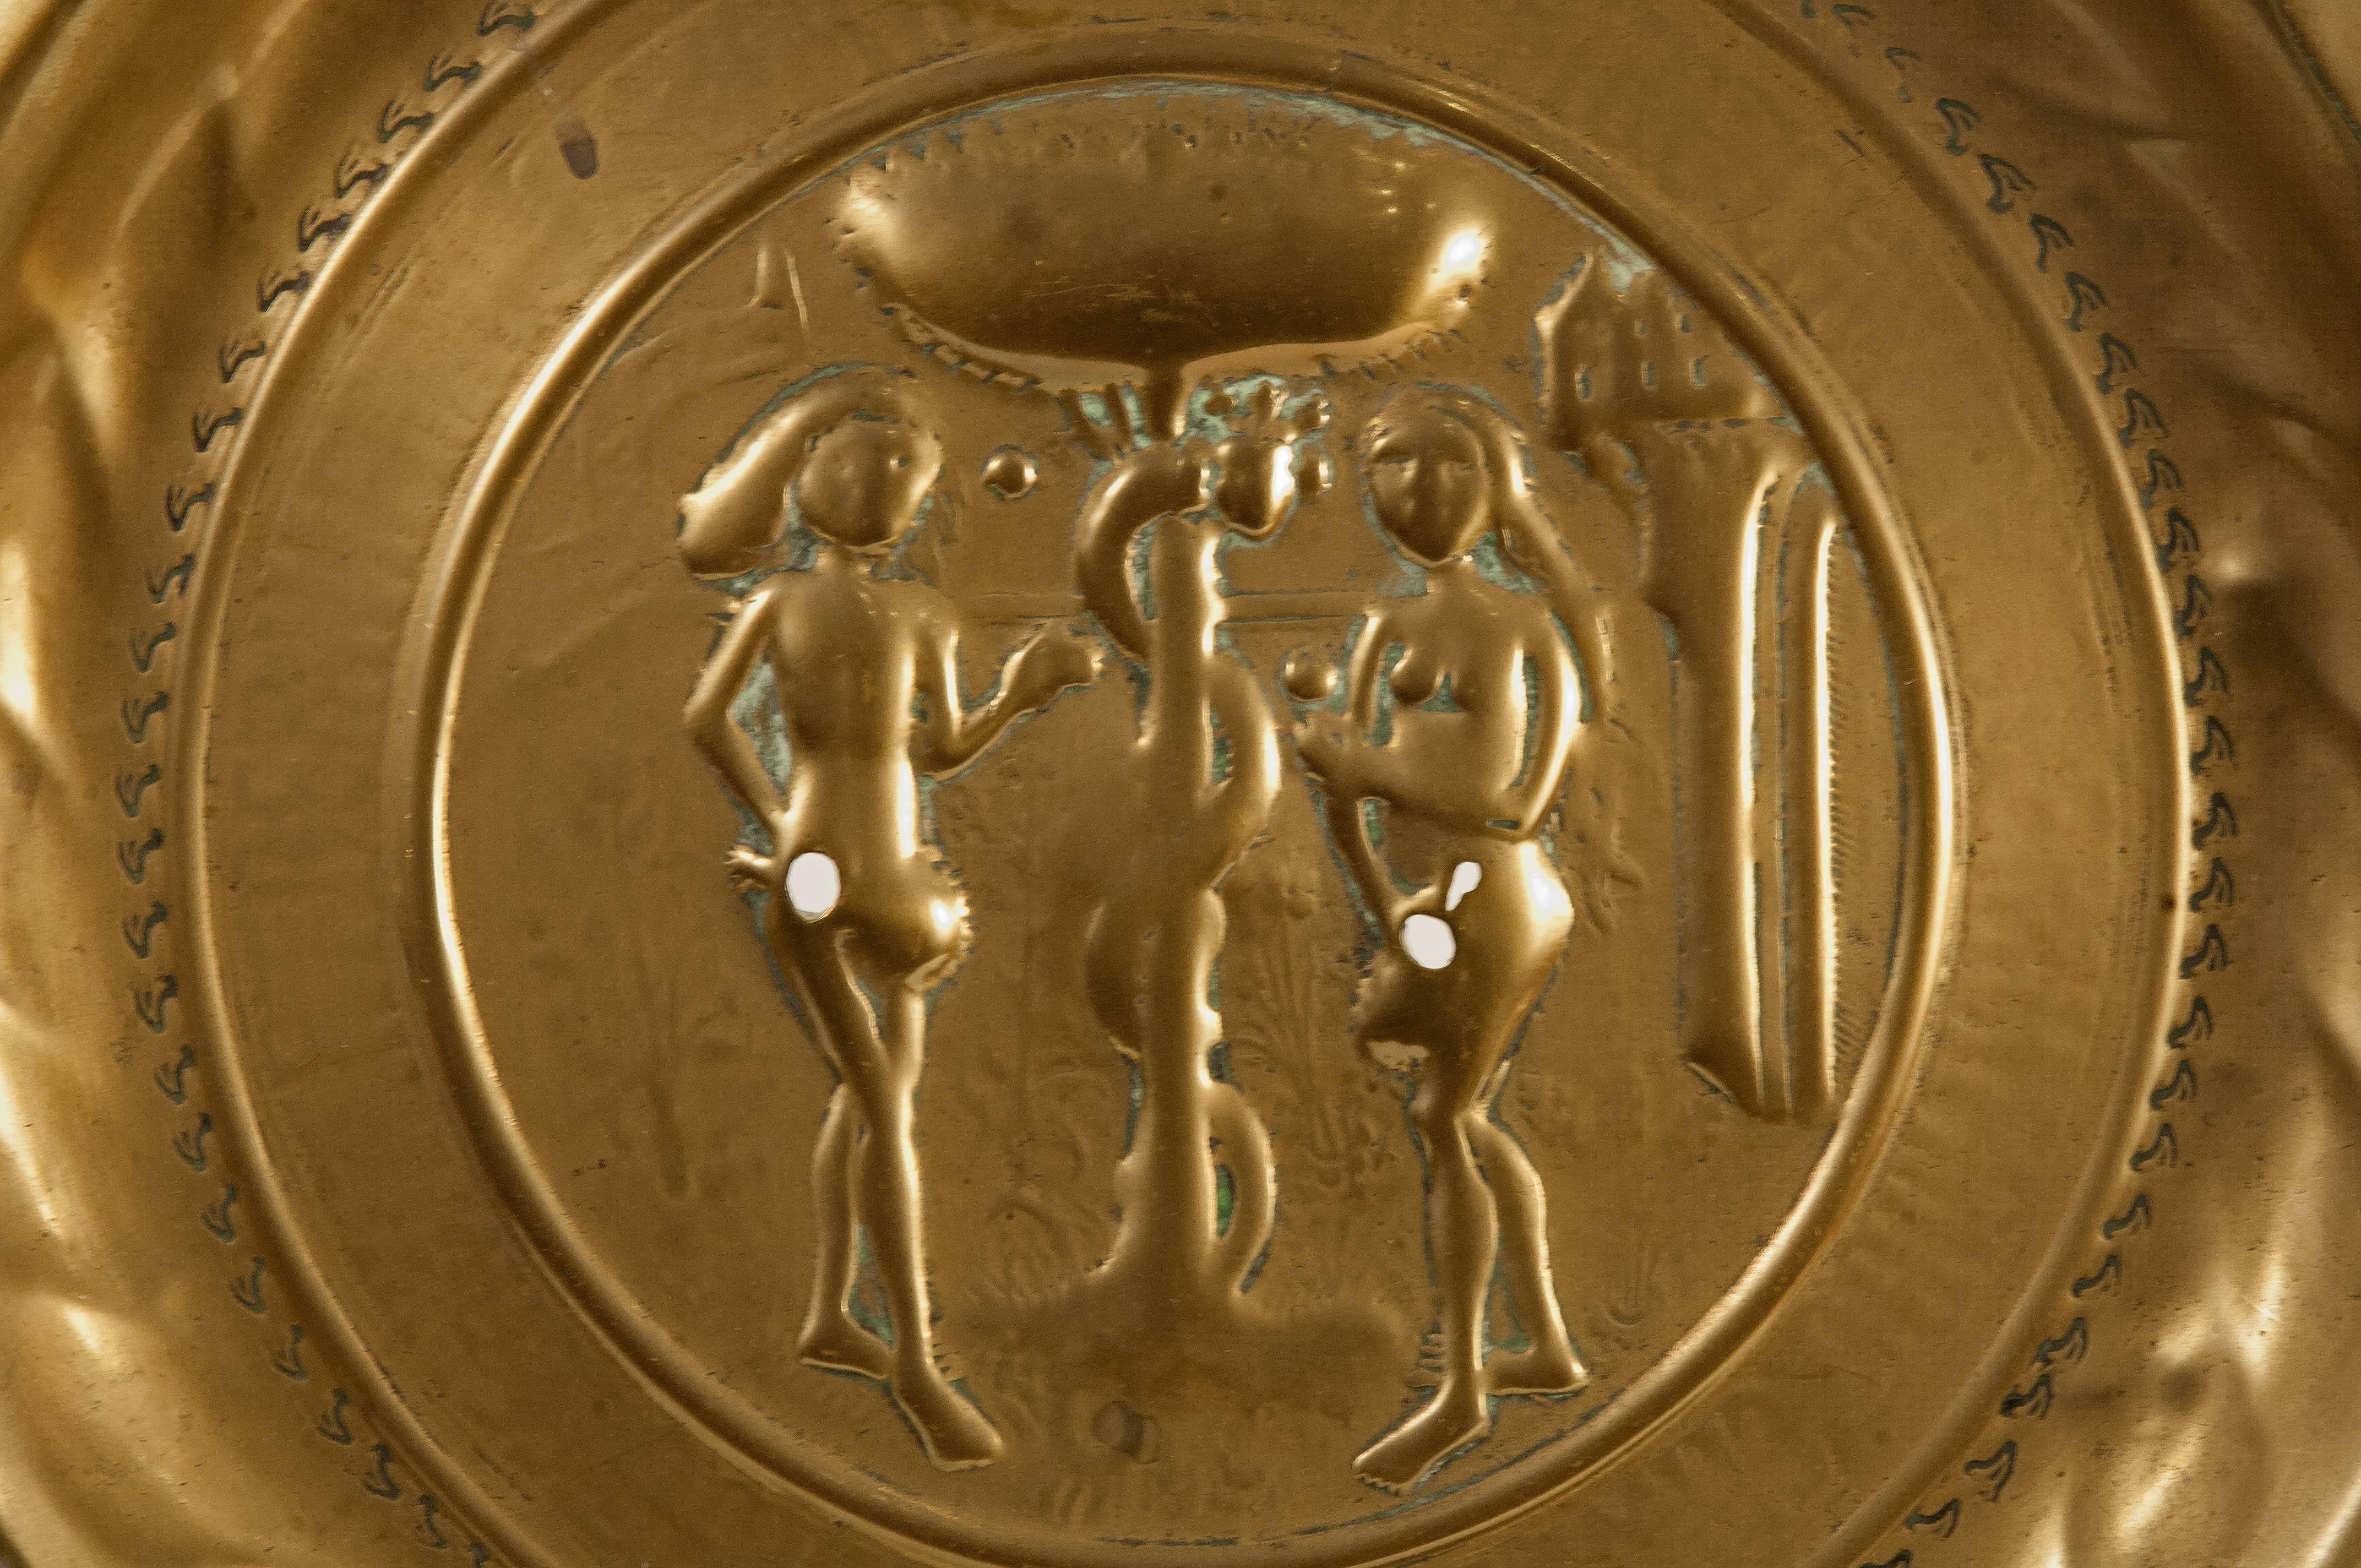 Alms collection dish made of gilded brass decorated with a series of moldings and details both on the edge and towards the center. In this area there is a figurative motif in light relief (Adam and Eve flanking the tree in which the Serpent of